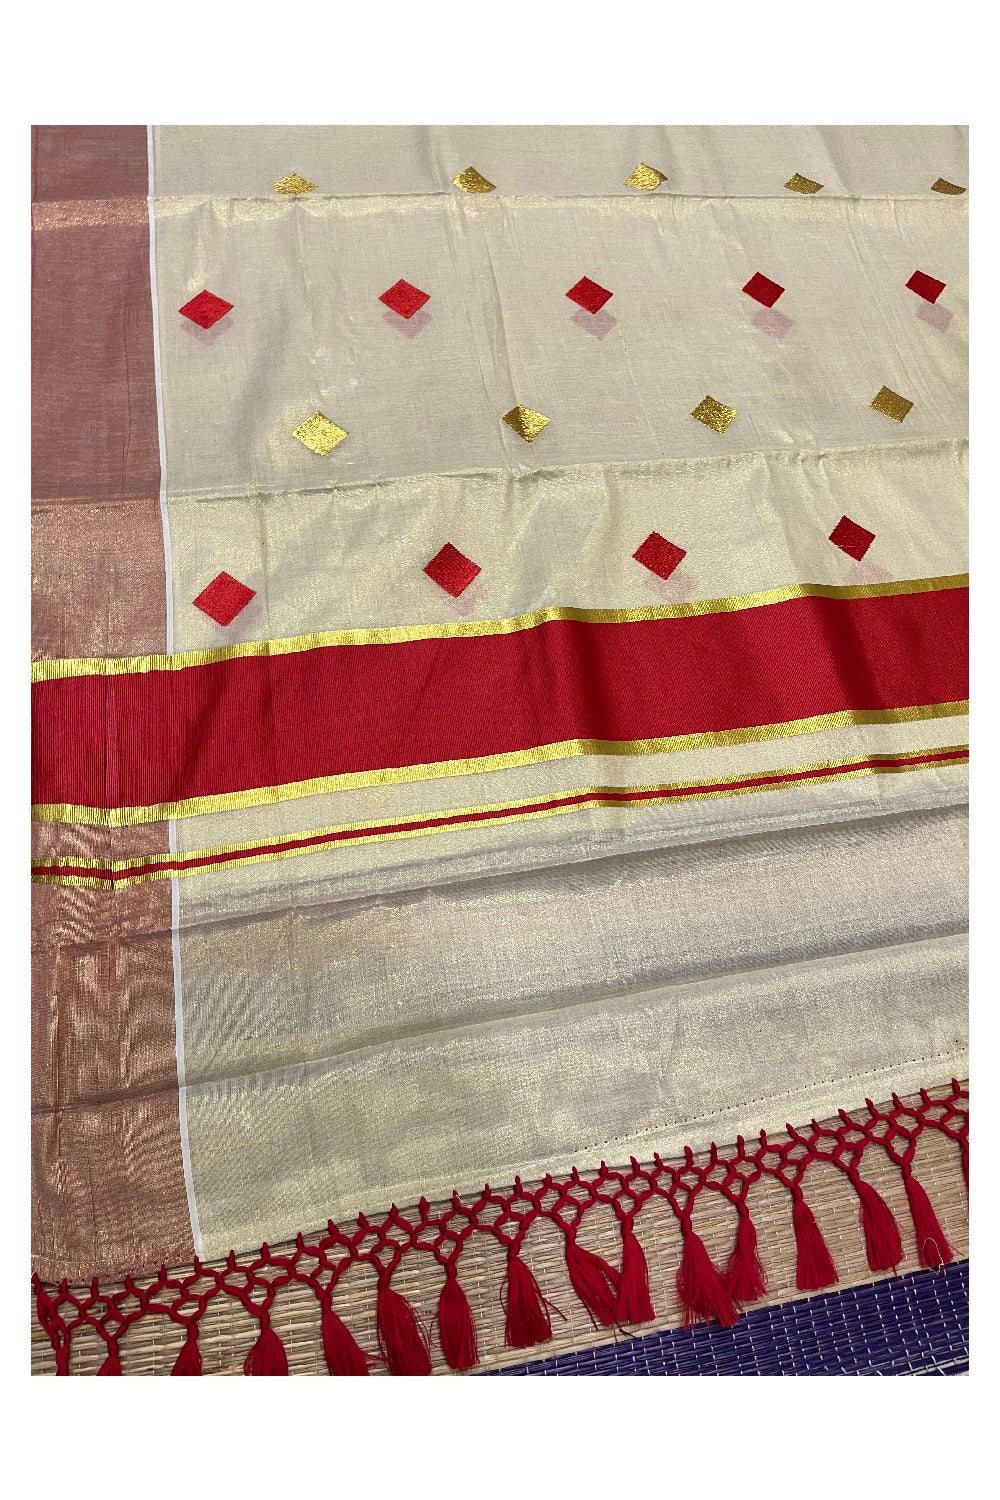 Kerala Tissue Kasavu Saree with Red Gold Woven Butta Designs and Tassels Works